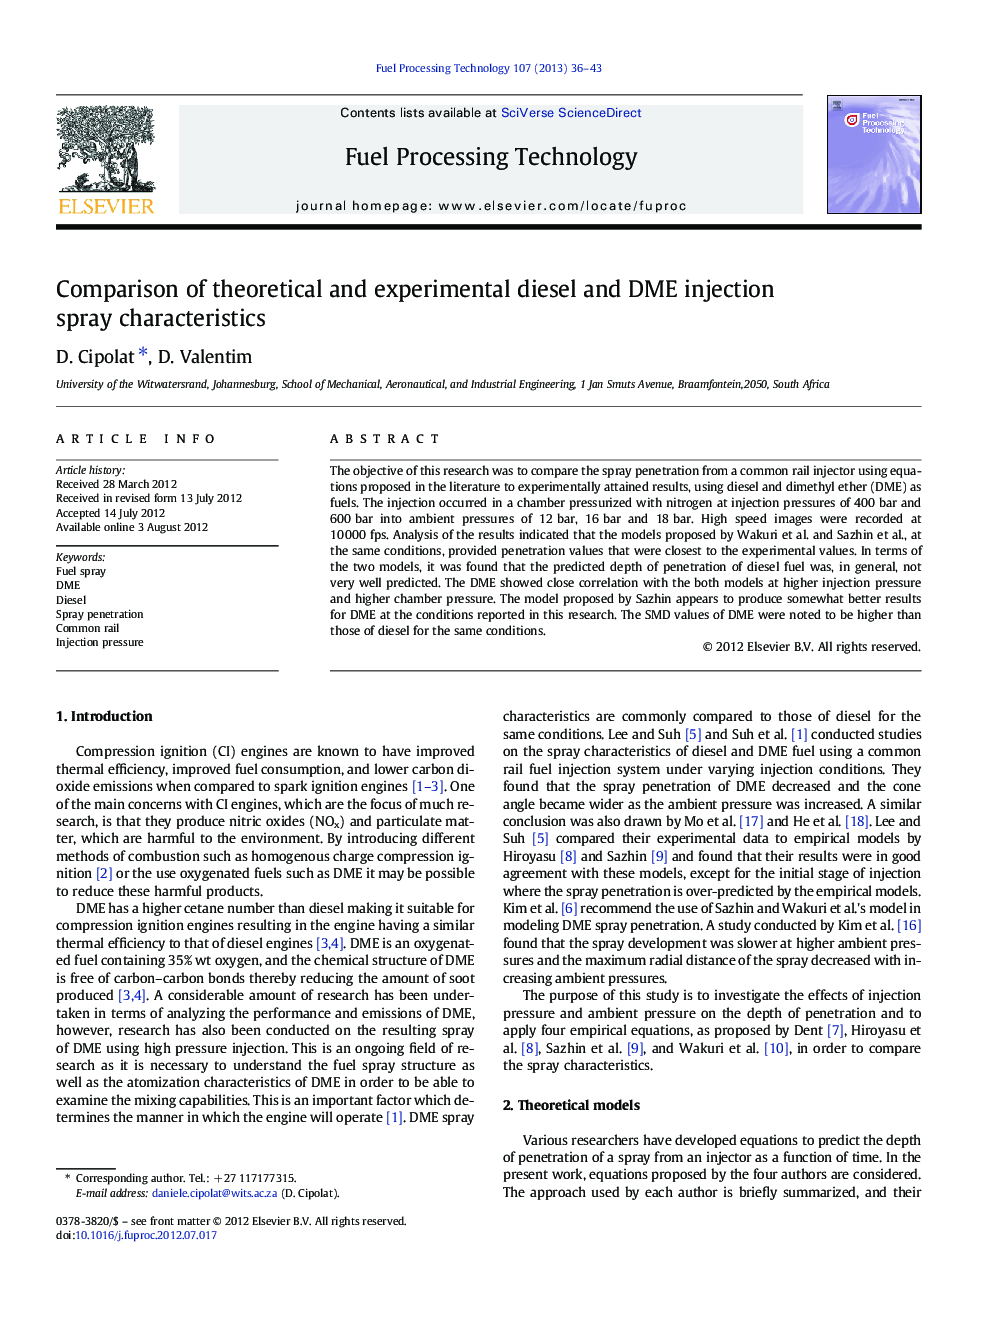 Comparison of theoretical and experimental diesel and DME injection spray characteristics